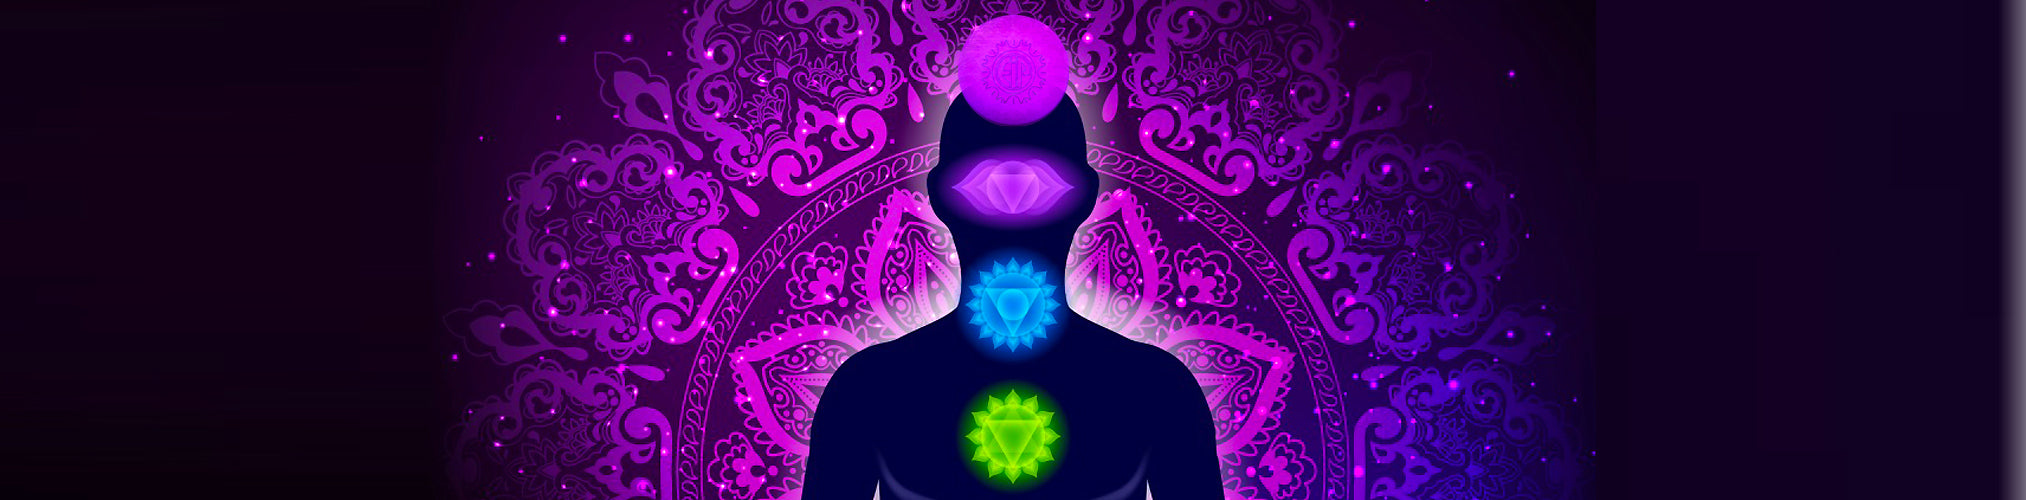 7th Chakra on crown of head with tesla purple energy plate on top